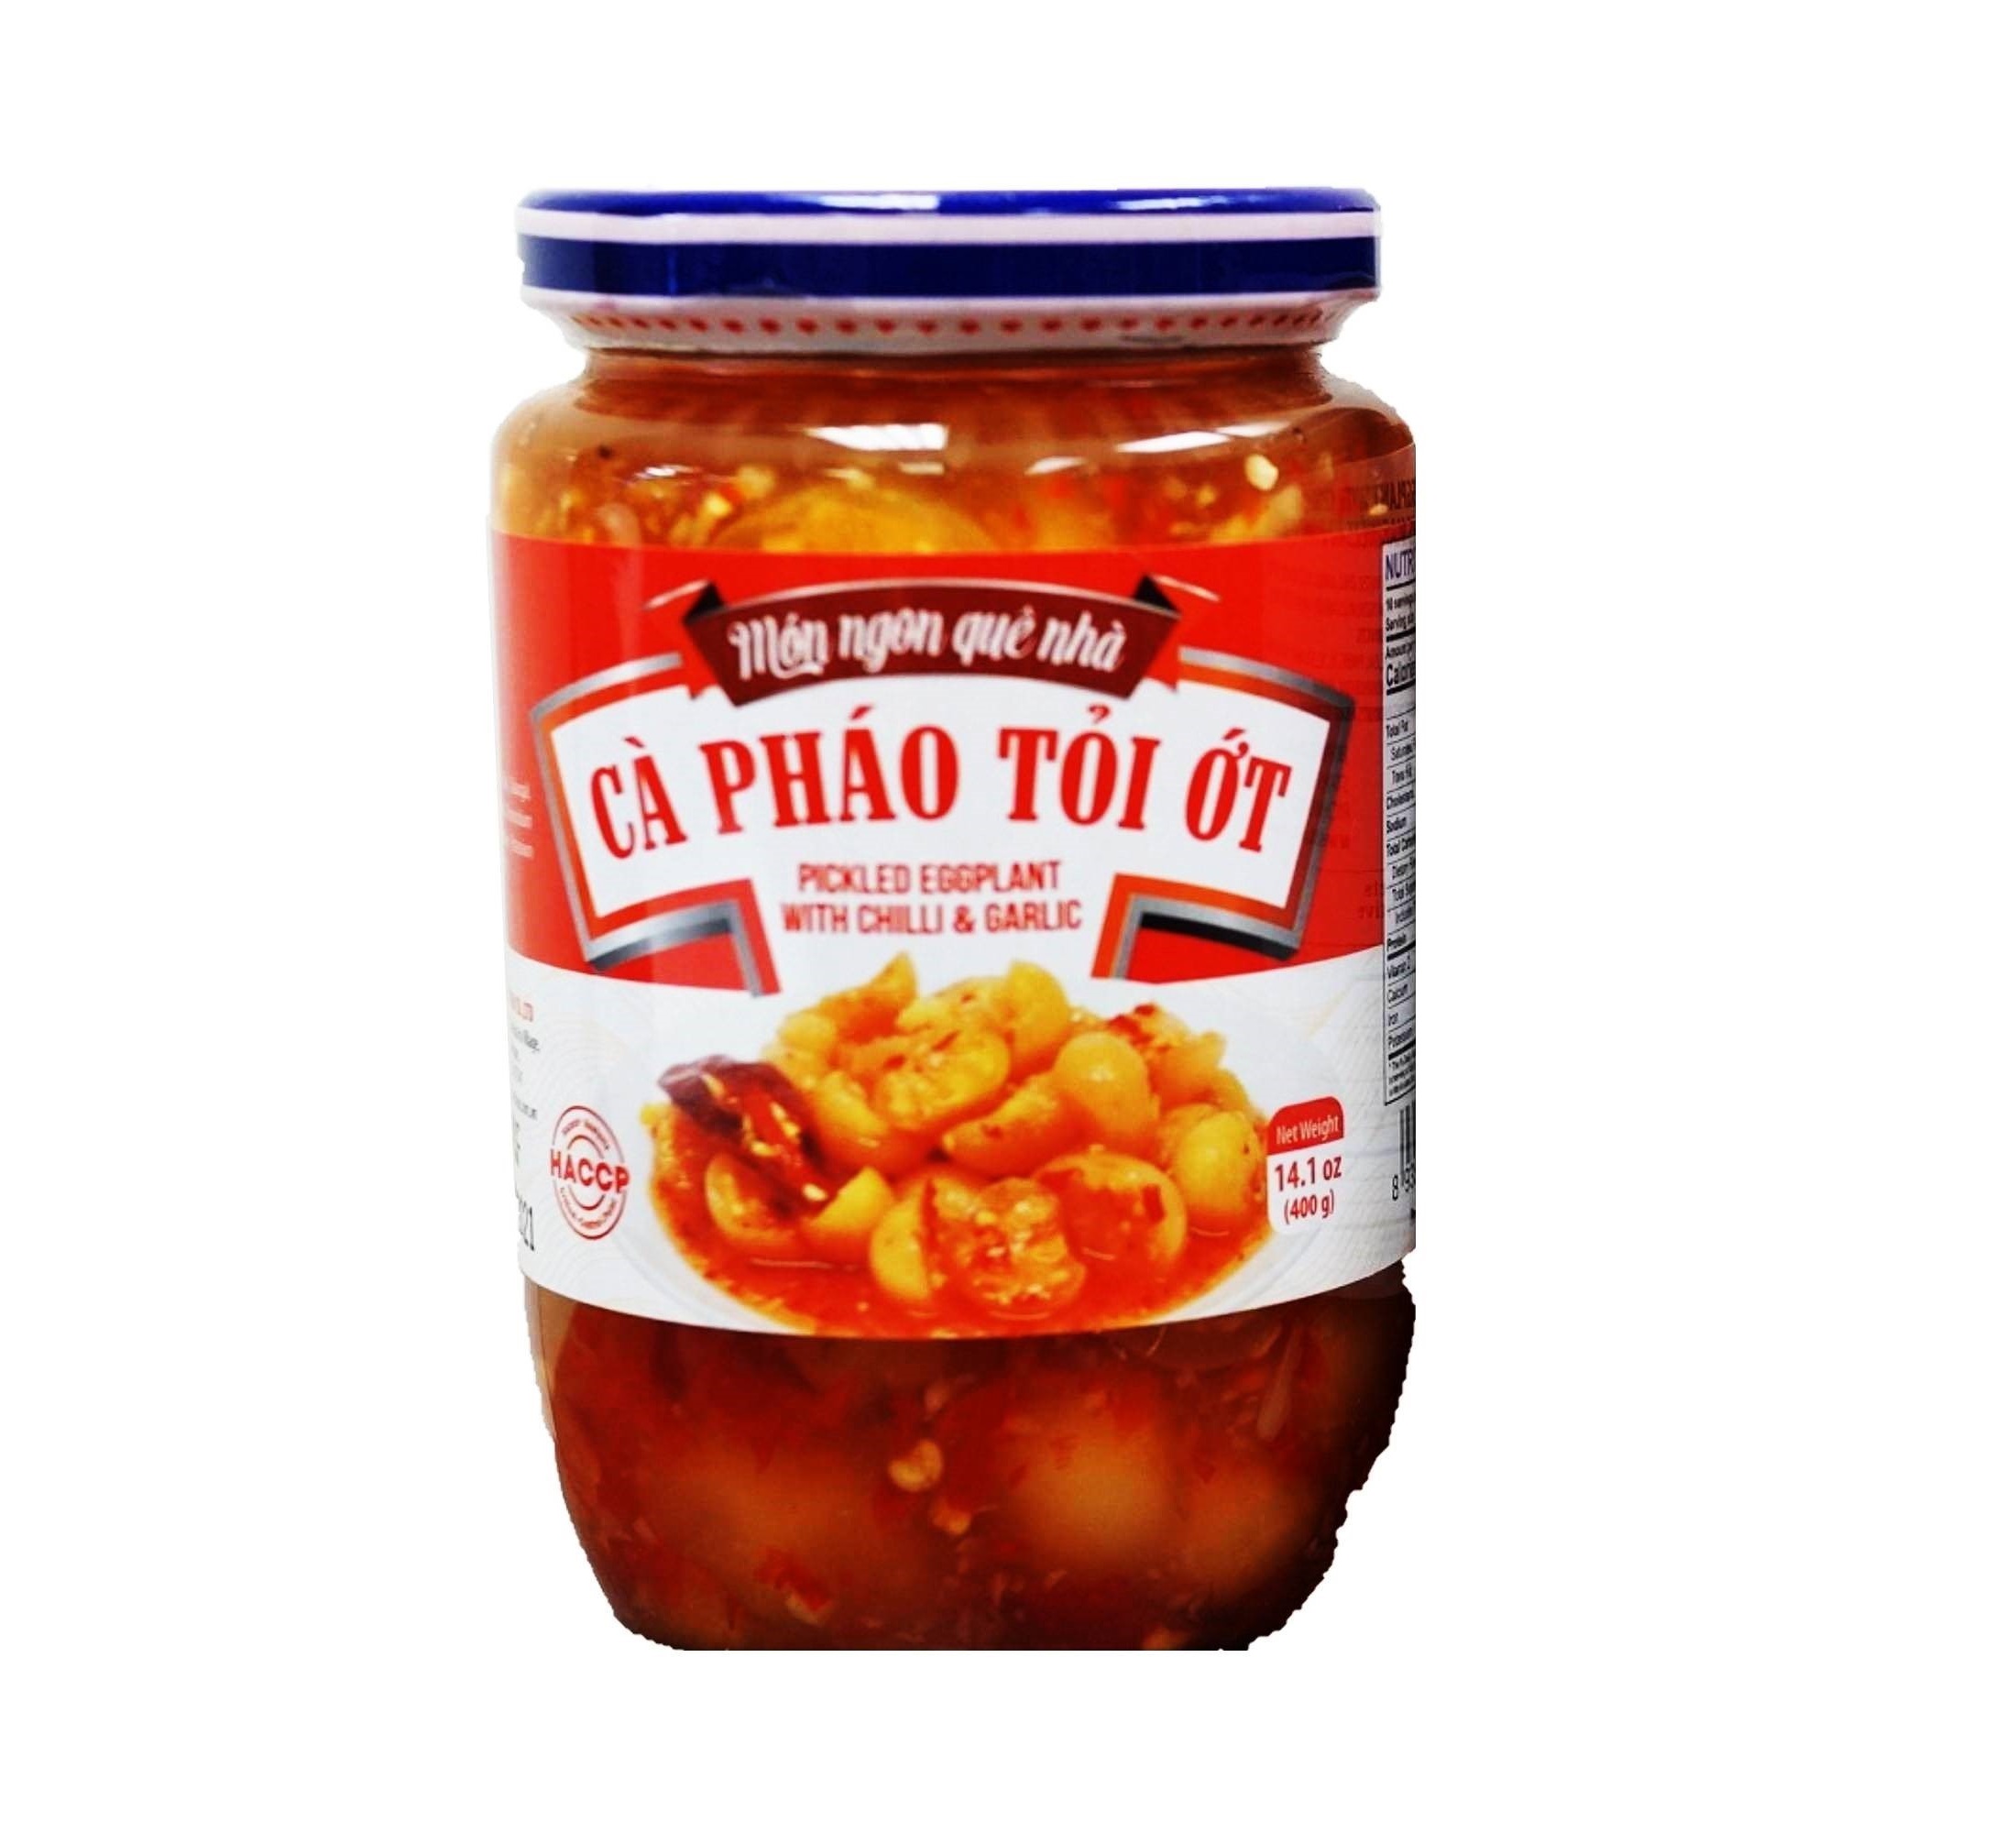 Pickled Egg Plant with Chili Garlic AG300150